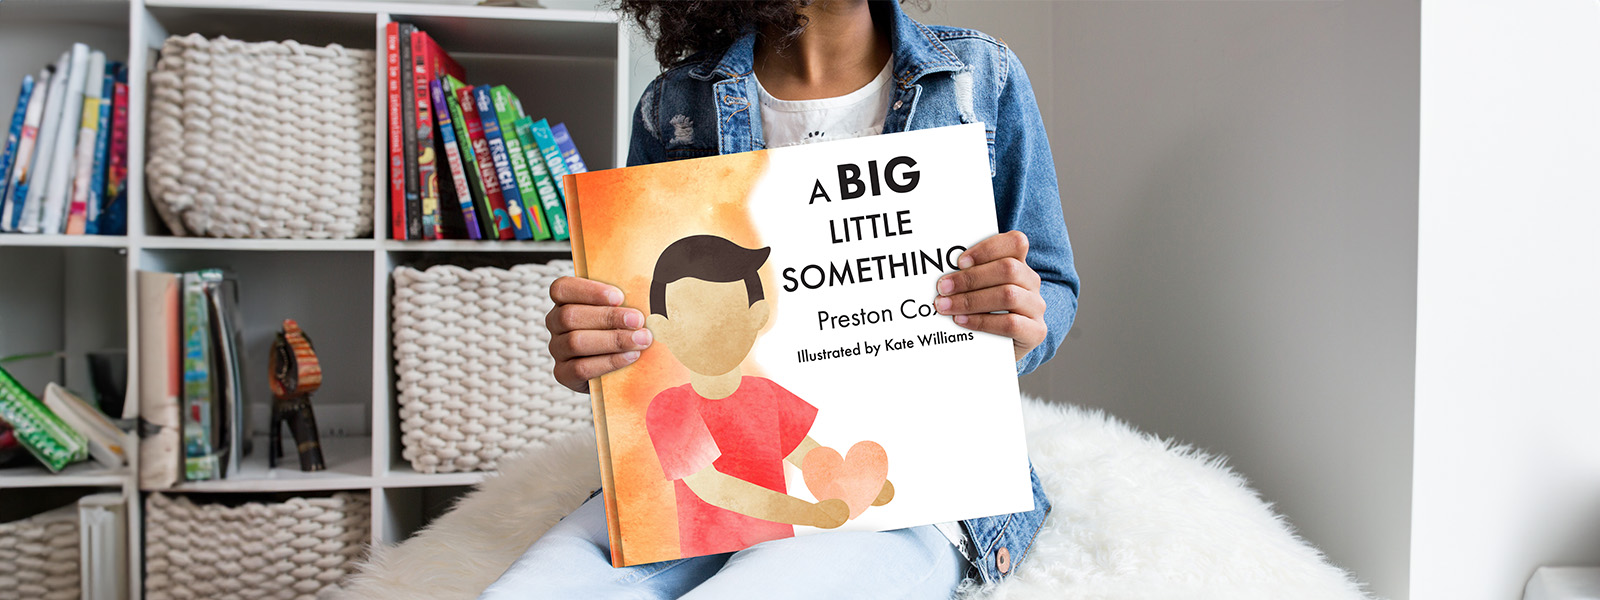 A Big Little Something Illustration and Graphic Design